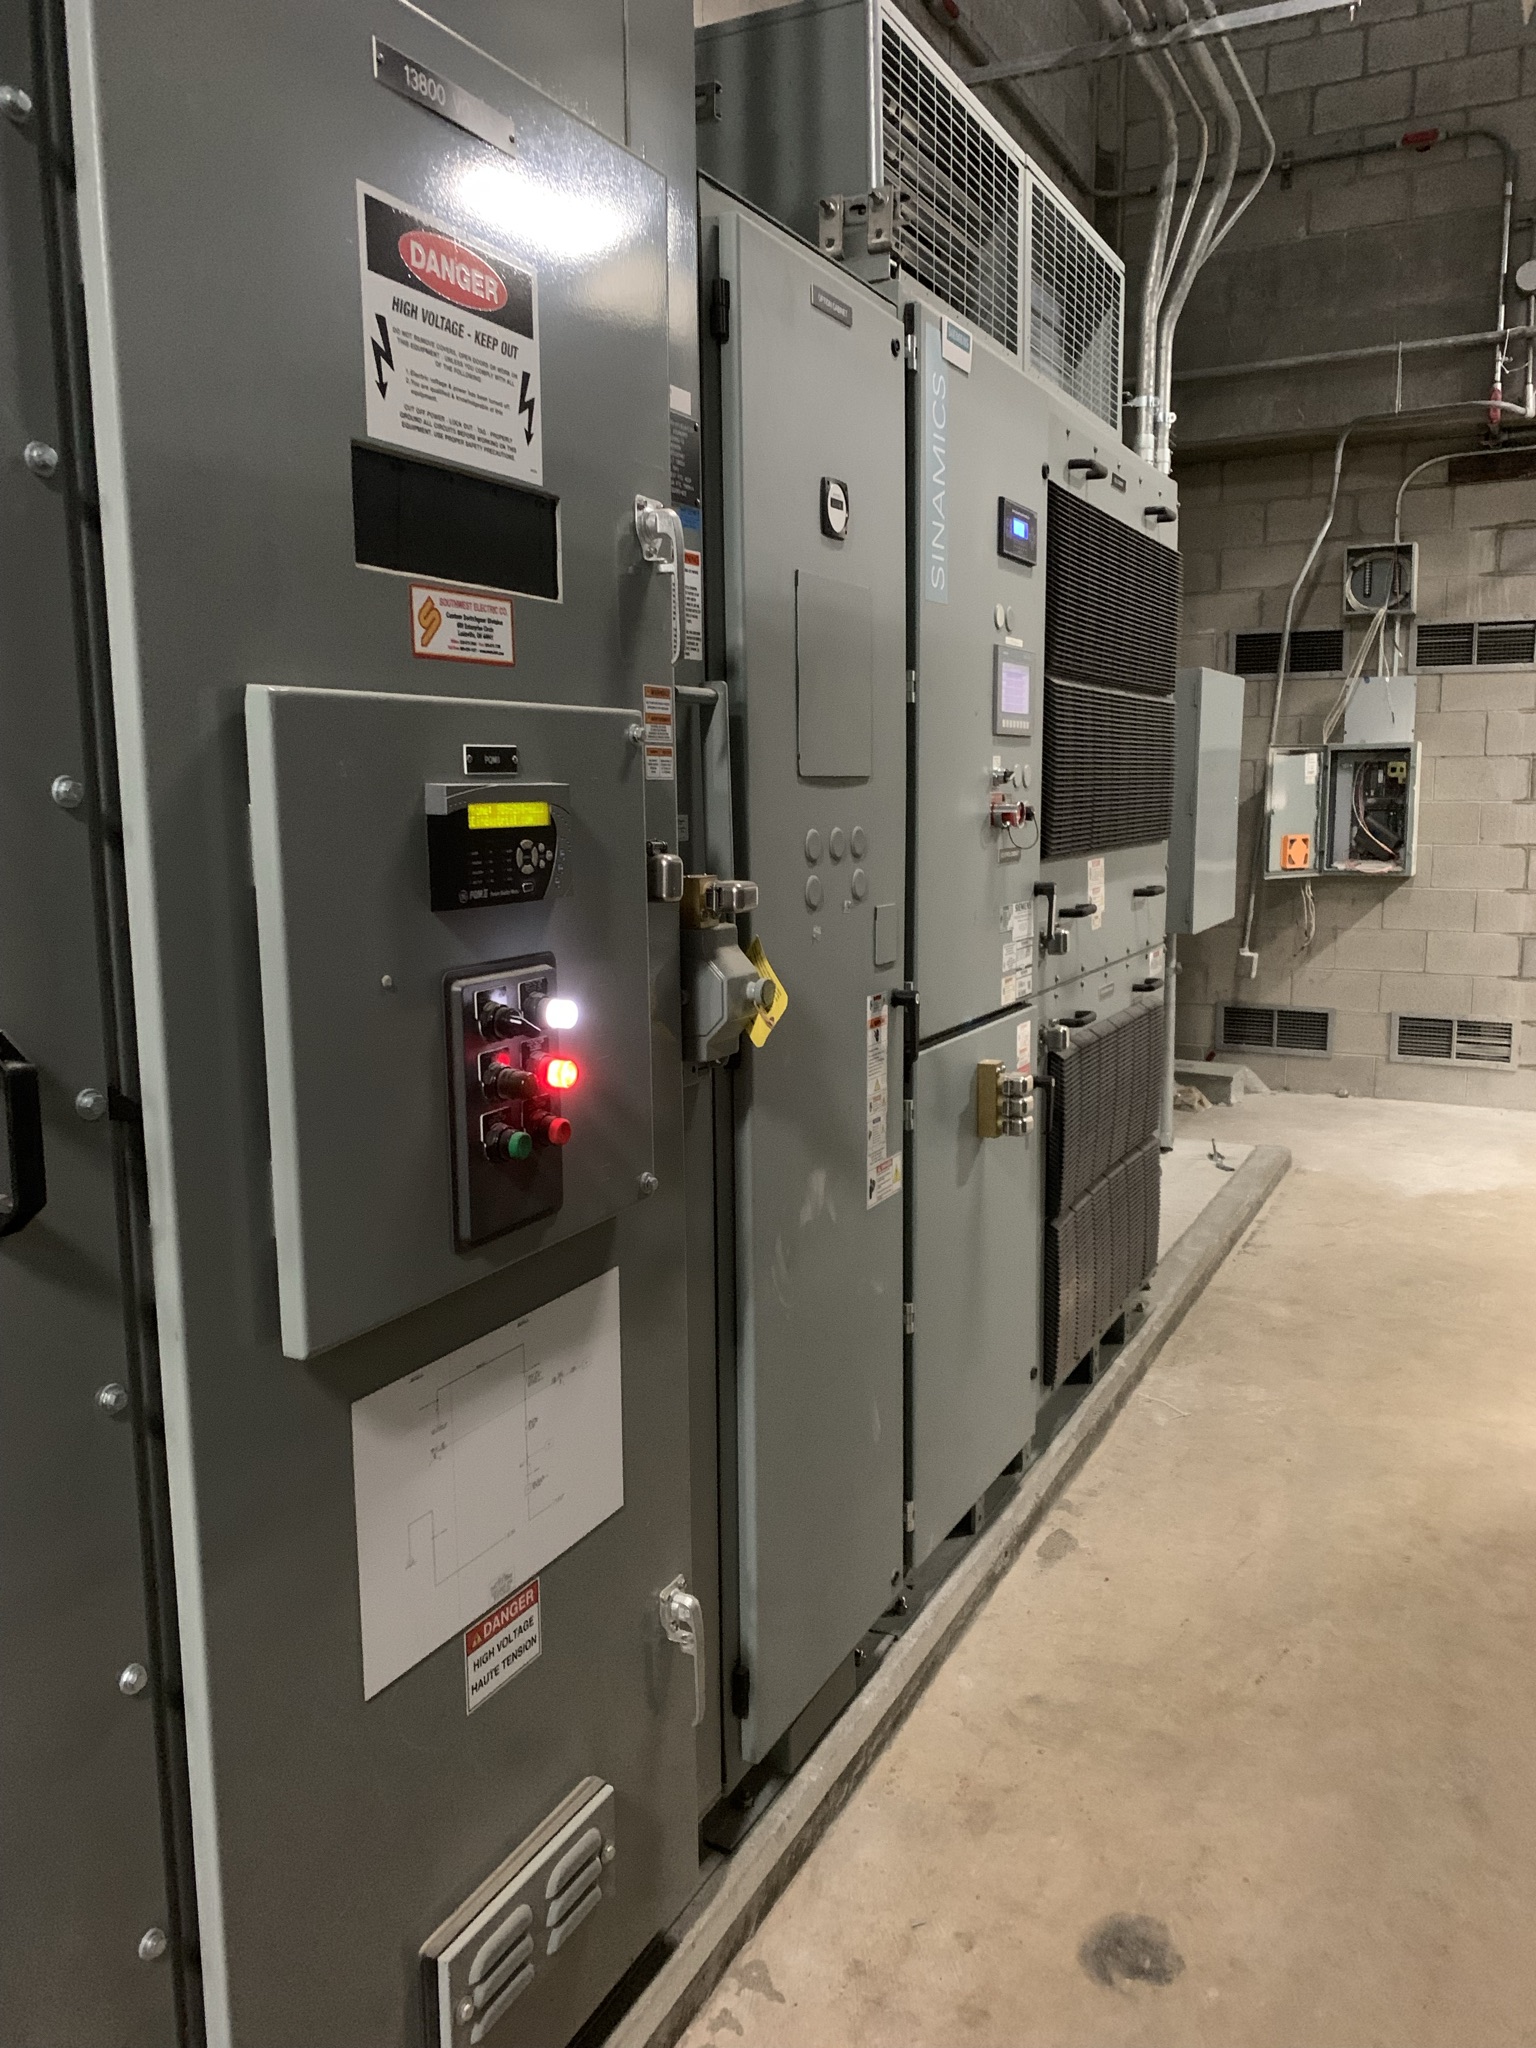 In this picture, you can see the mechanical exterior of the new Variable Frequency Drive, or VFD. A VFD is an electrical device that controls the speed of an electric motor, such as the ones used at our wastewater treatment plant, by varying it's input voltage.